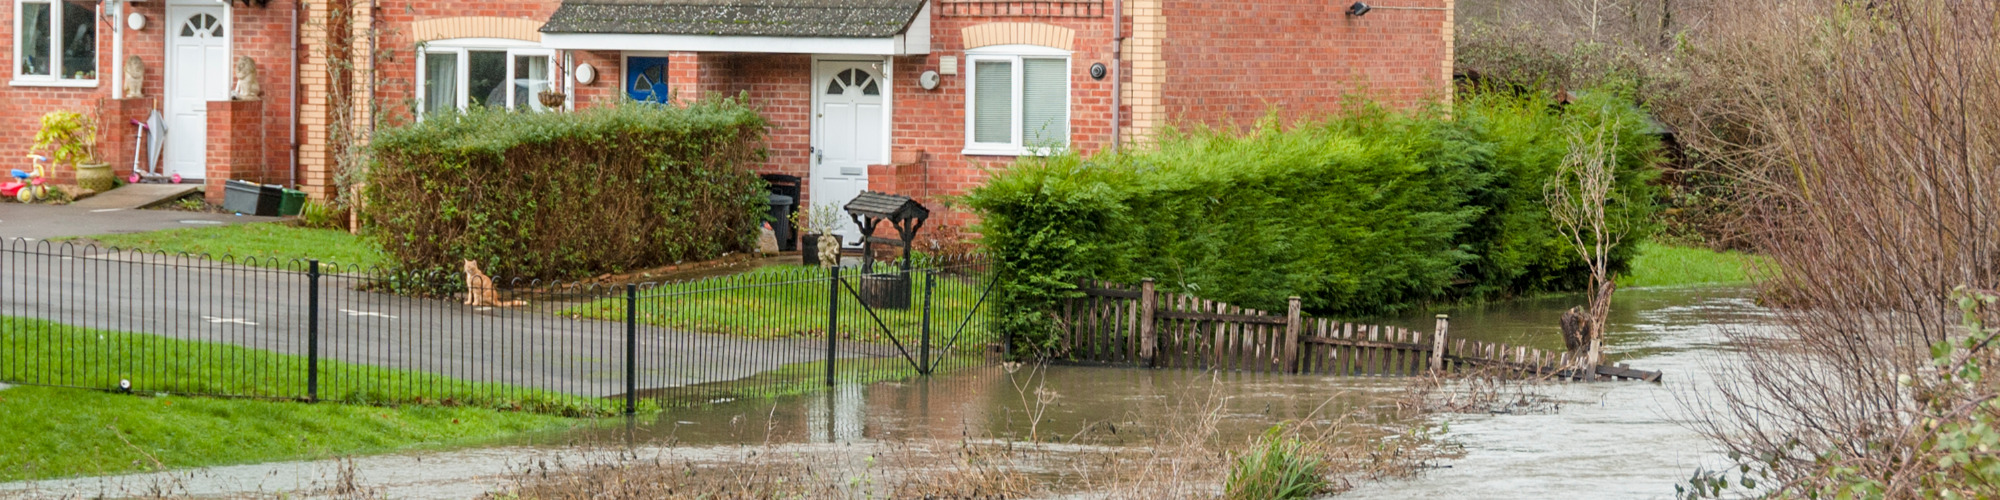 Advising Clients against Flood Risk - A Guide for Conveyancers